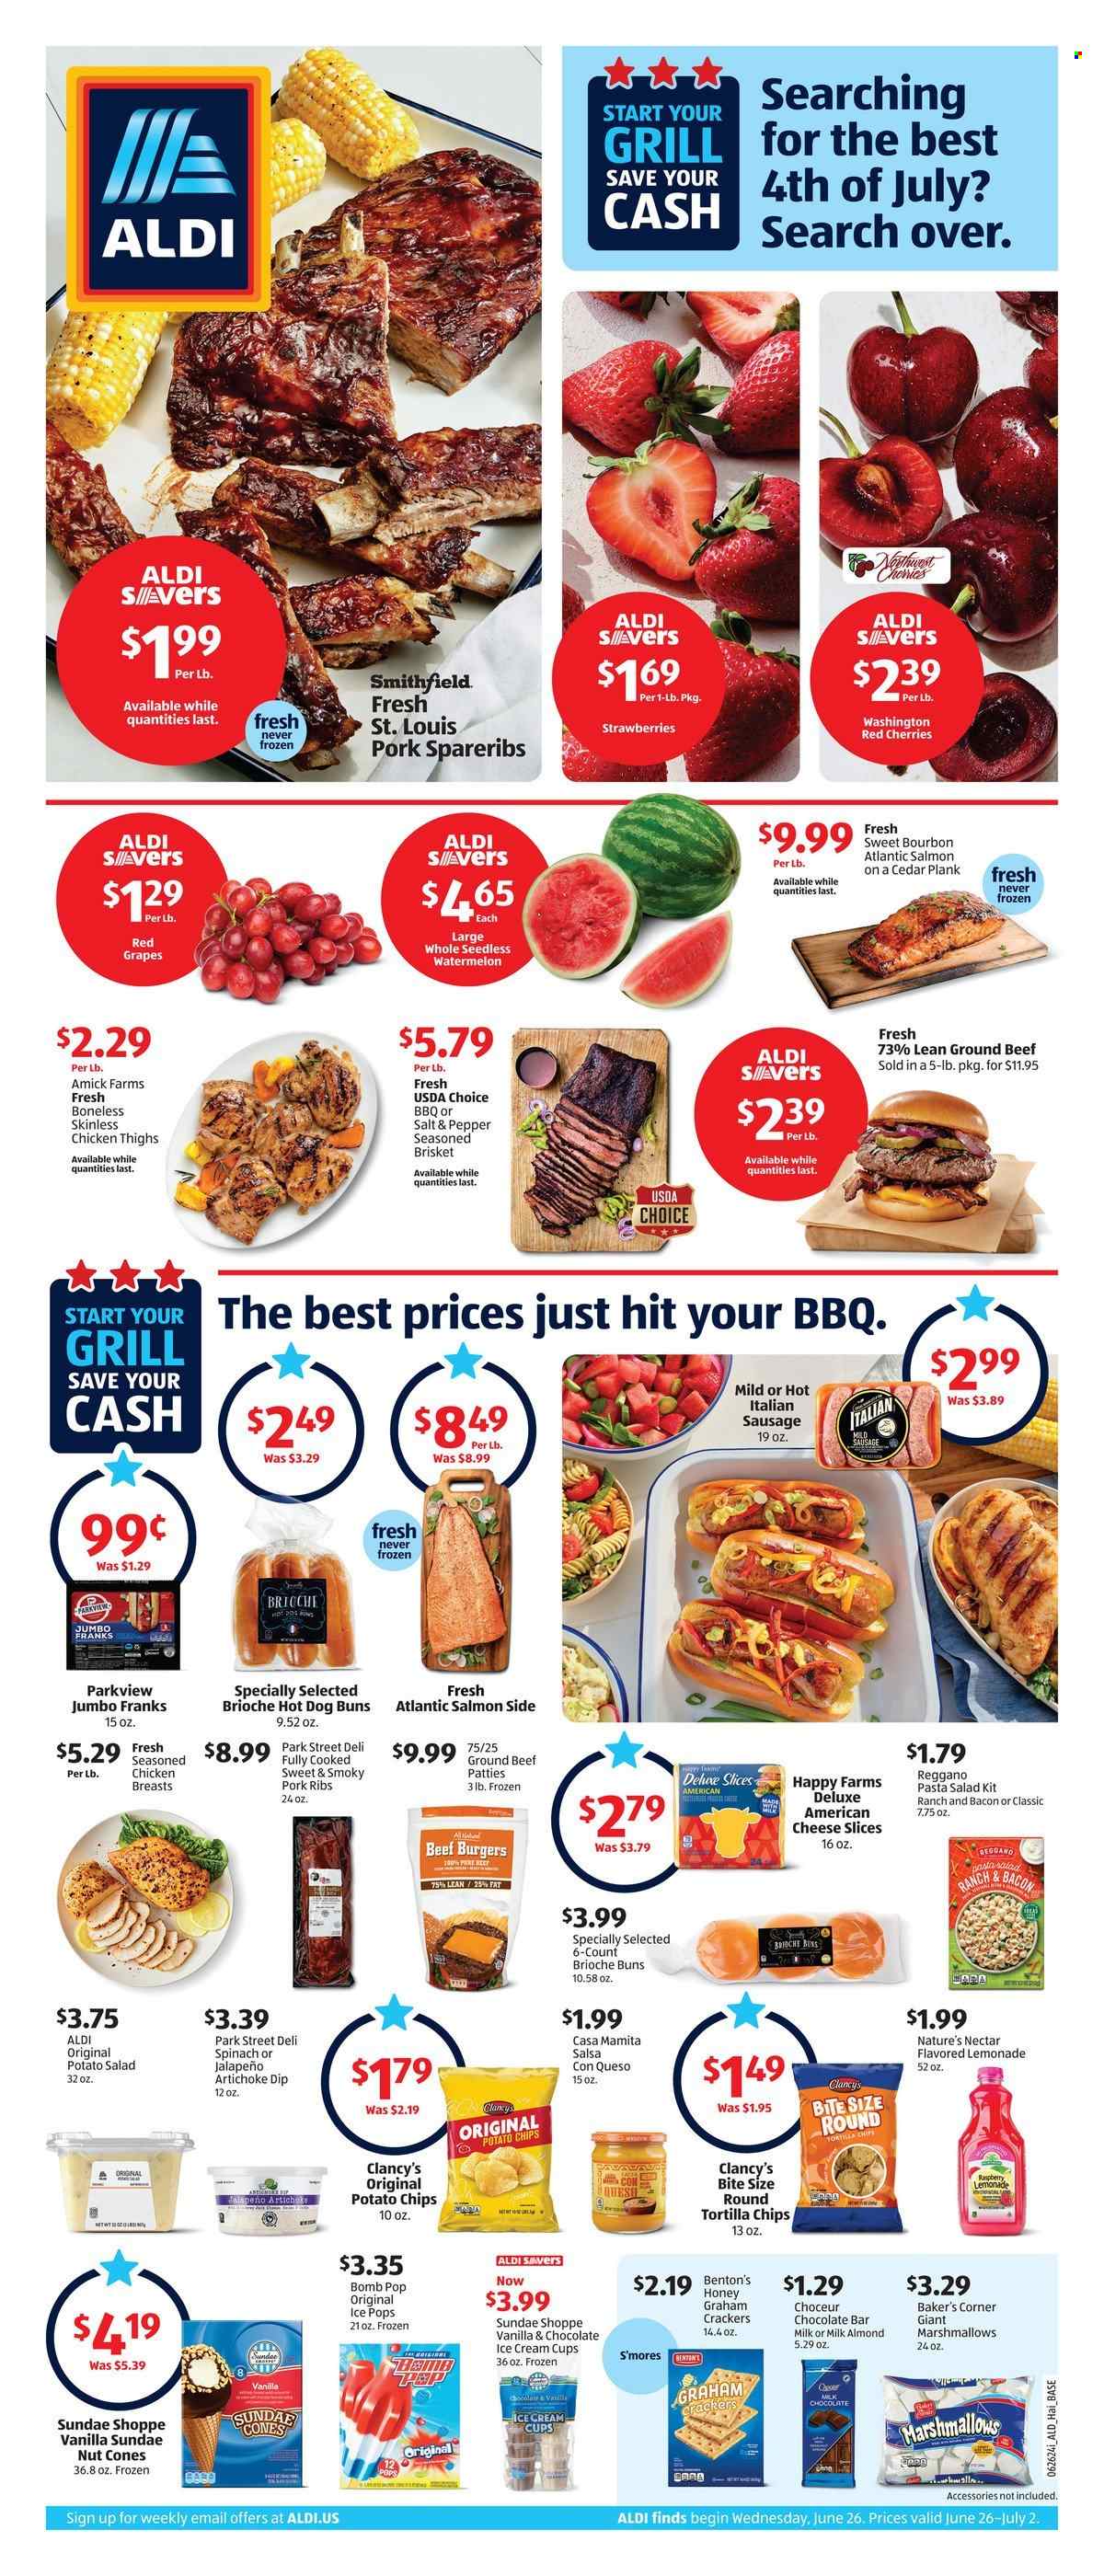 thumbnail - ALDI Flyer - 06/26/2024 - 07/02/2024 - Sales products - ribs, pork meat, pork ribs, pork spare ribs, strawberries, cherries, watermelon, frankfurters, hot dog rolls, buns, brioche, sausage, italian sausage, chicken breasts, chicken, burger patties, beef meat, ground beef, pasta salad, salad, potato salad, dip, potato chips, chips, salsa, tortilla chips, ice cream, ice cones, ice cream bars, popsicle, graham crackers, crackers, chocolate bar, marshmallows, lemonade, american cheese, sliced cheese, cheese, waffle cones, grapes, marinated meat, brisket, chicken thighs, salmon, alcohol, fish fillets, salmon fillet. Page 1.